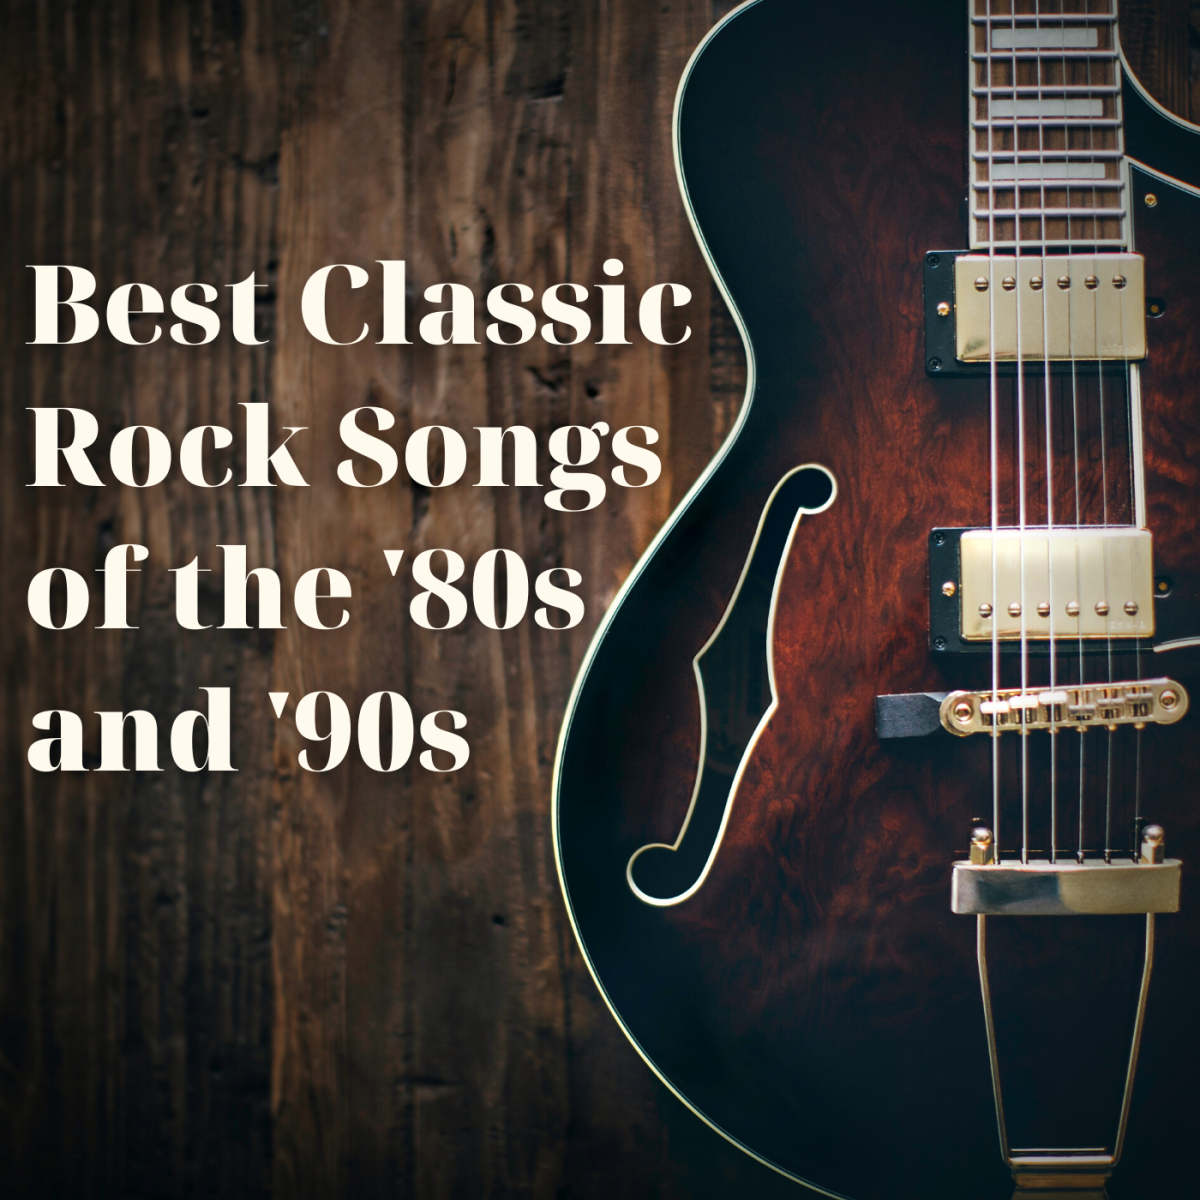 While the term "classic rock" is generally associated with rock songs from the '60s and '70s, music from the '80s and '90s is making its way onto these radio stations. See if your favorite songs made the list!